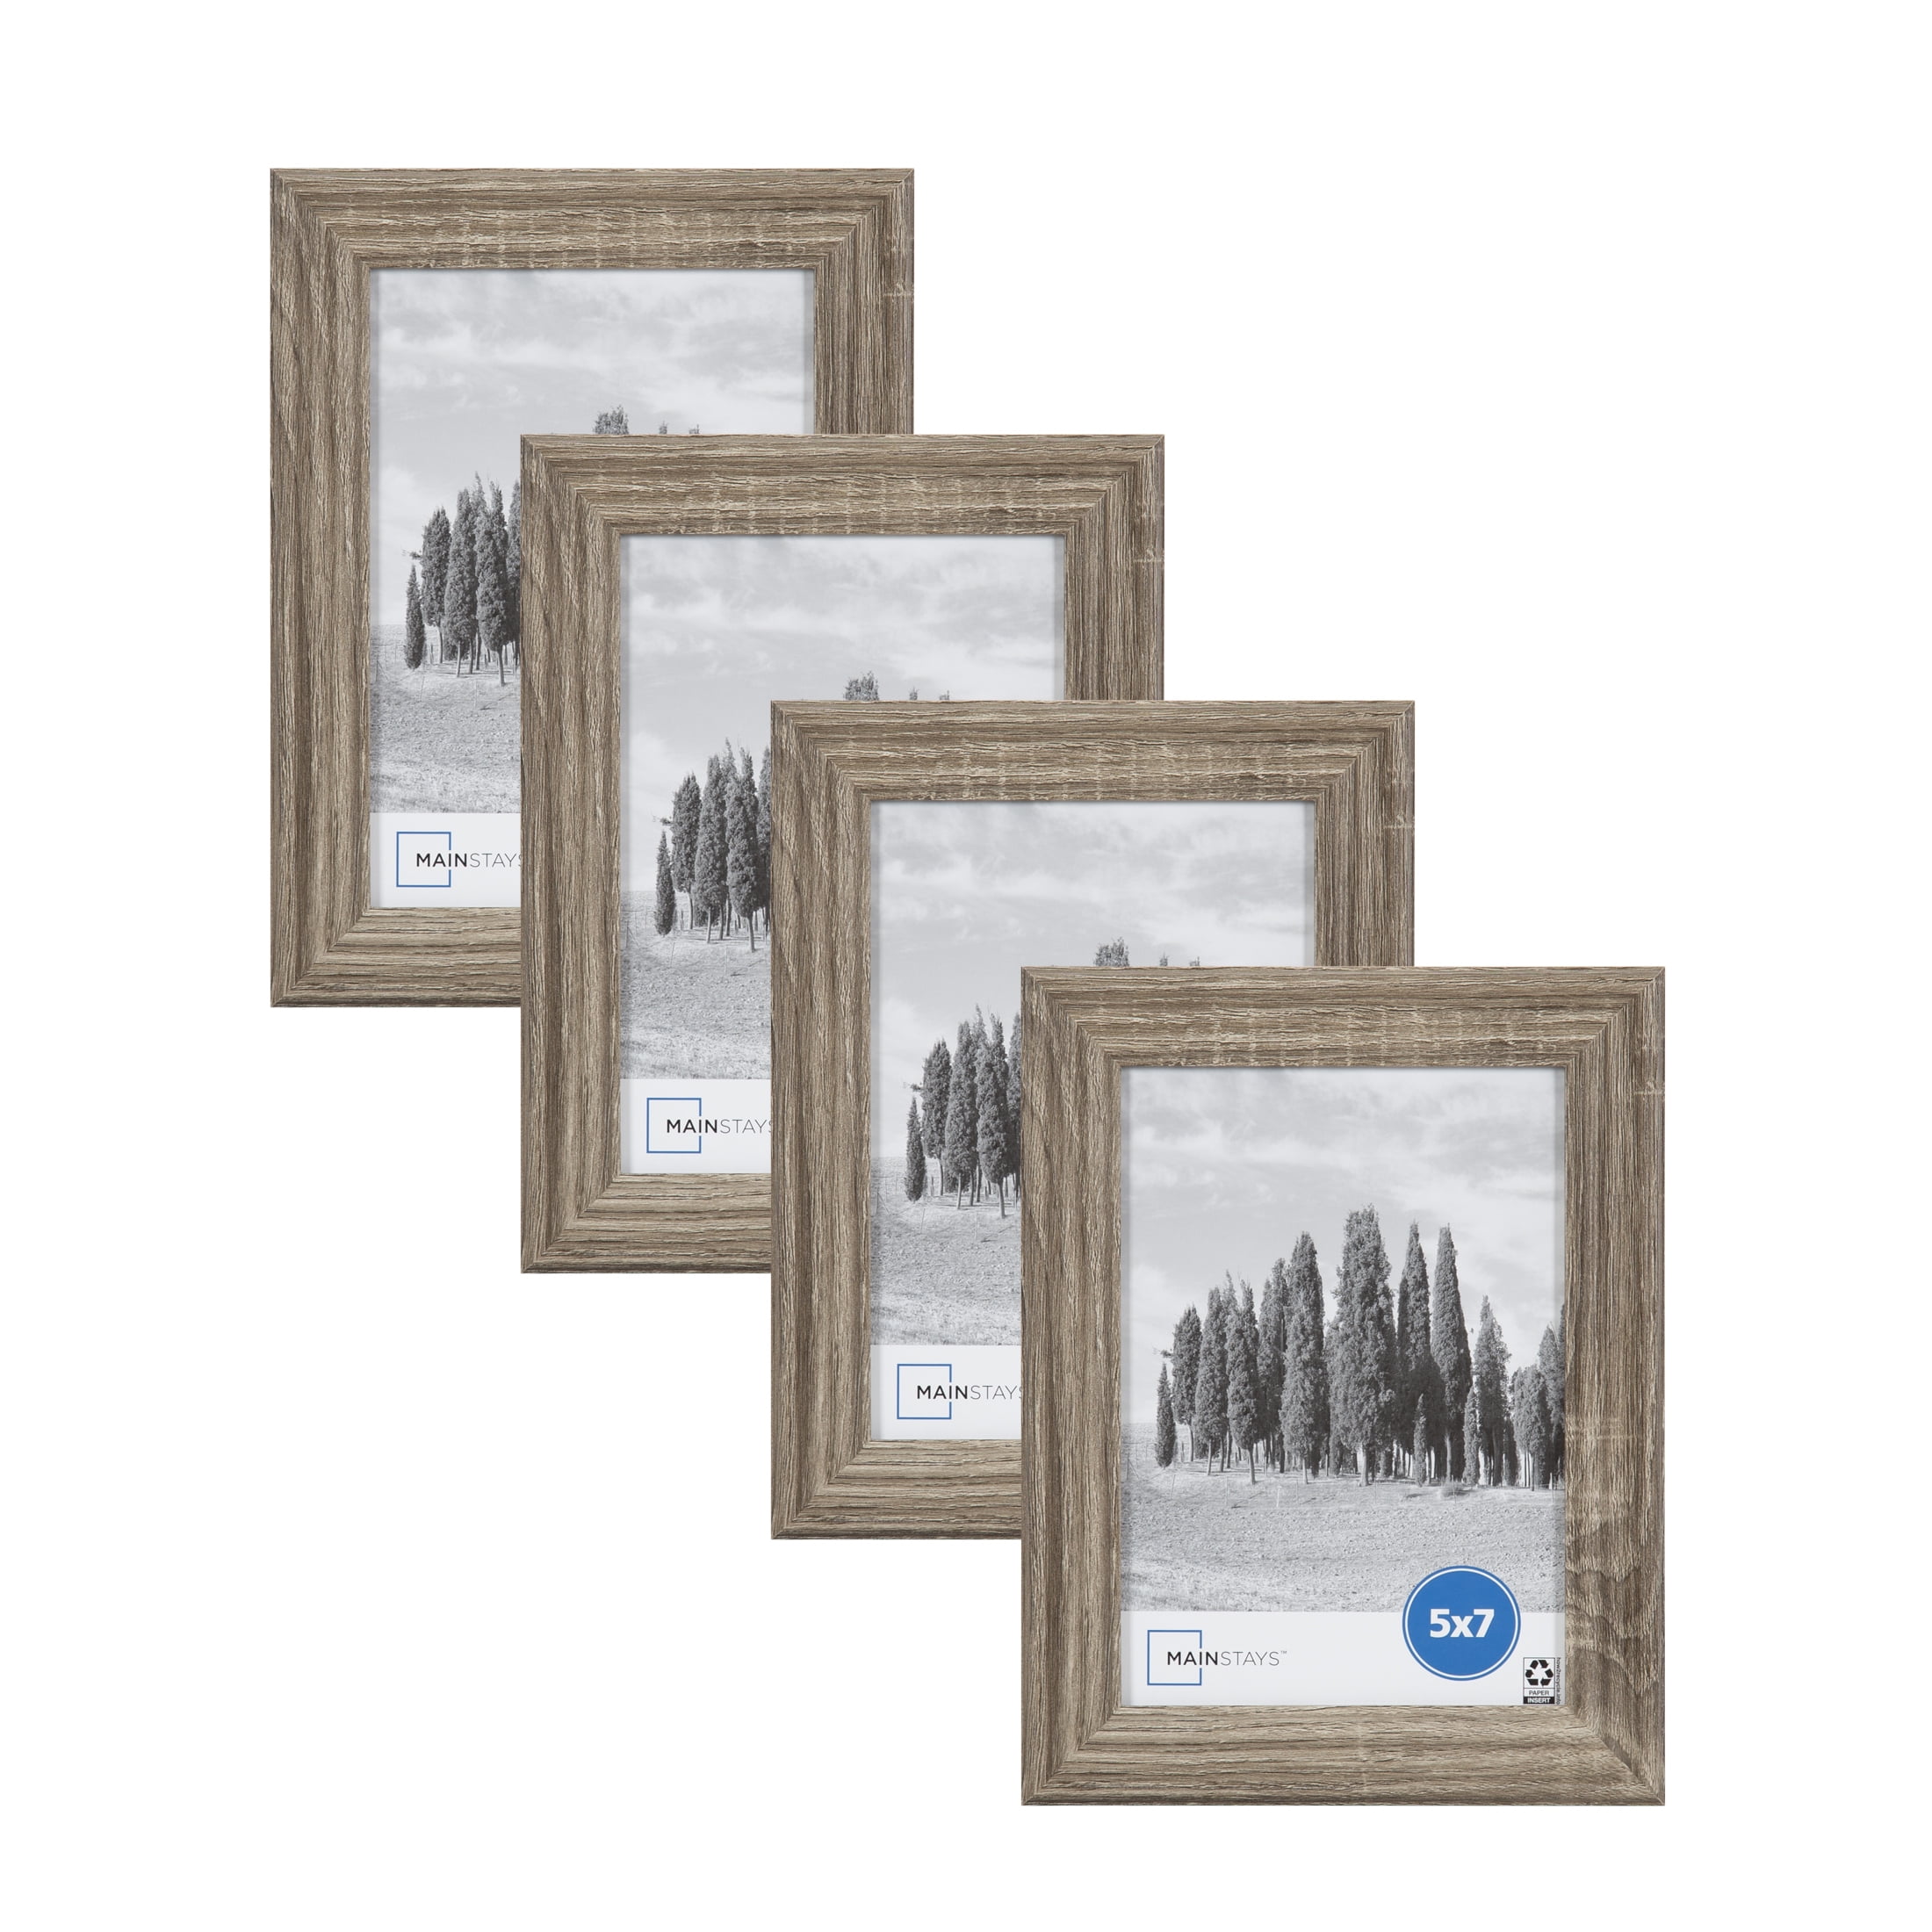 Mainstays 5x7 Wide Beveled Tabletop Picture Frame, Rustic Gray, Size: 5 x 7